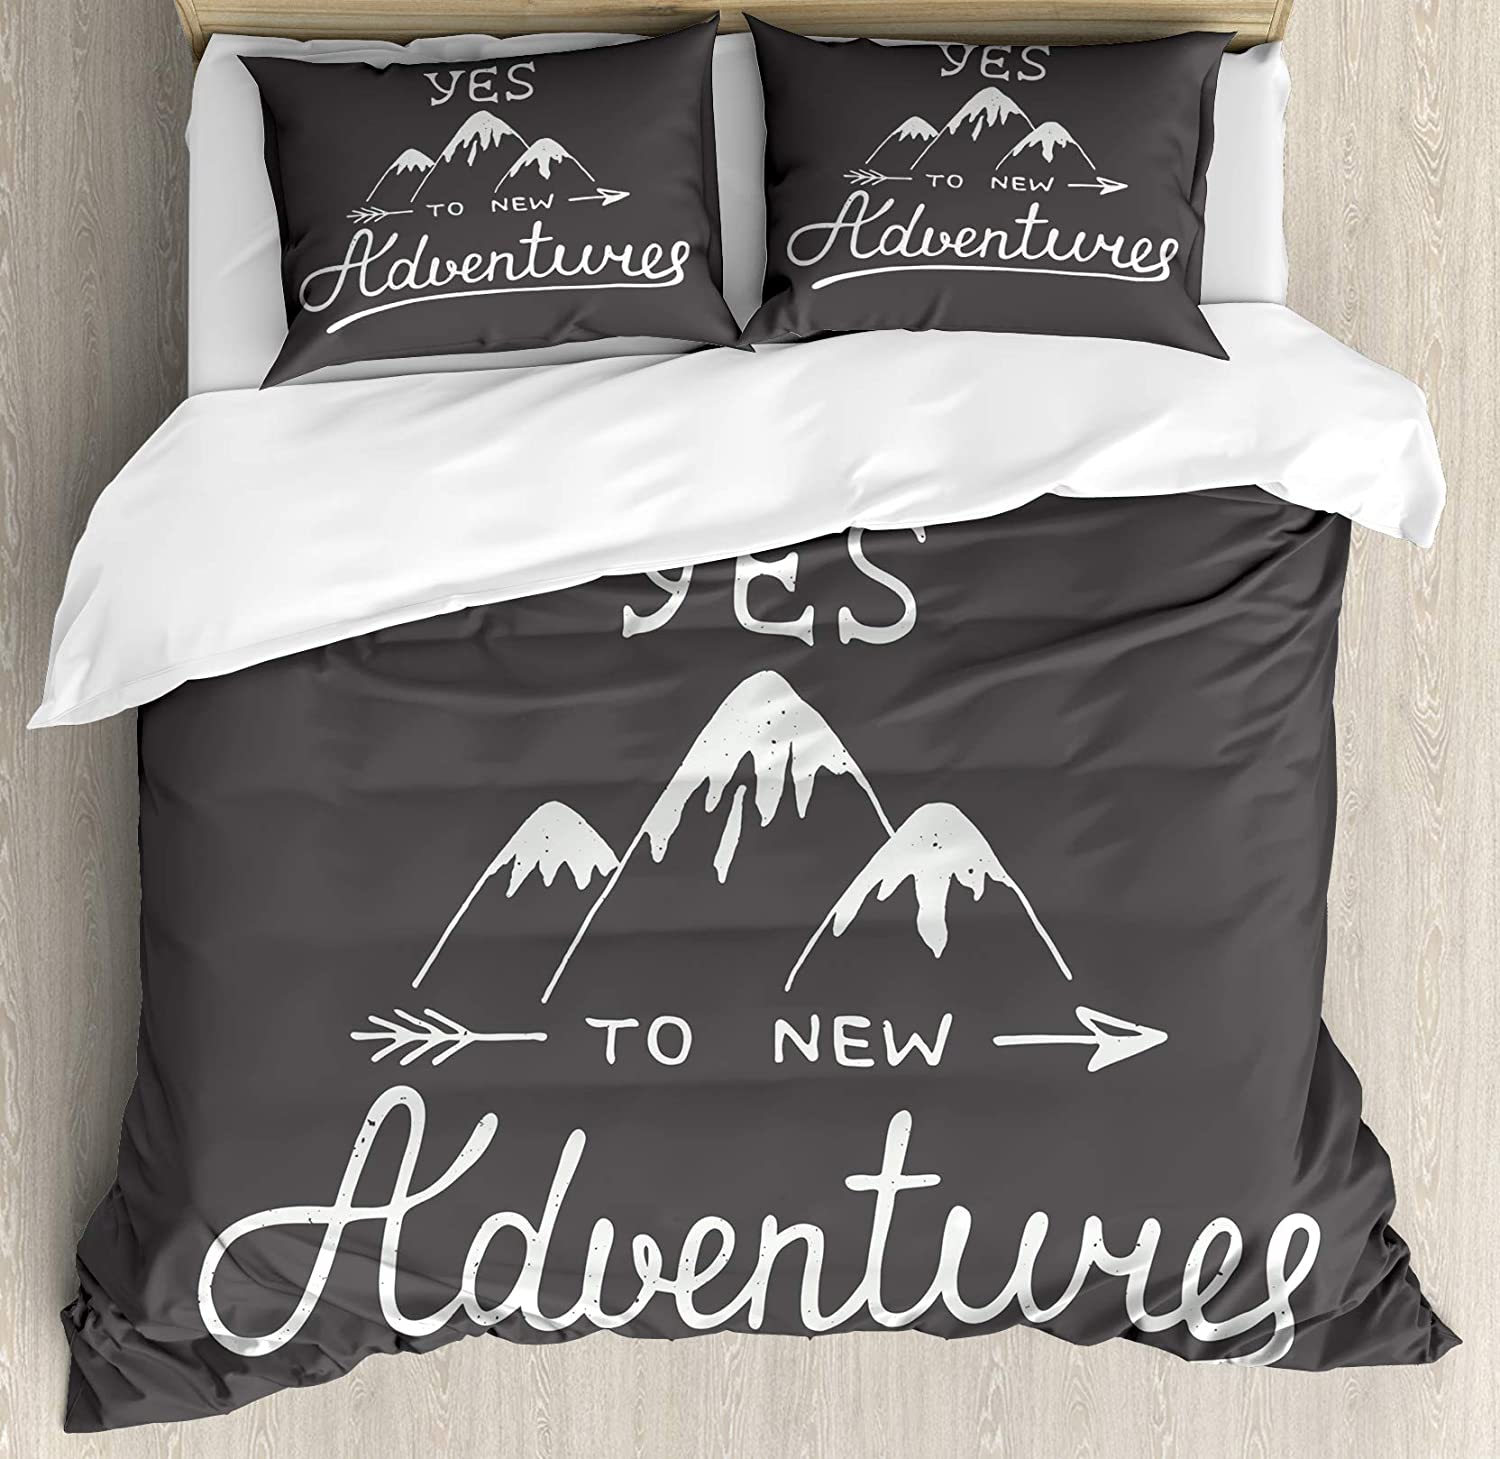 Price:$89.95  Adventure Duvet Cover Set, Say Yes to New Adventures Typographic Words with Scribble Mountains, Decorative 3 Piece Bedding Set with 2 Pillow Shams, King Size, Charcoal Grey : Home & Kitchen